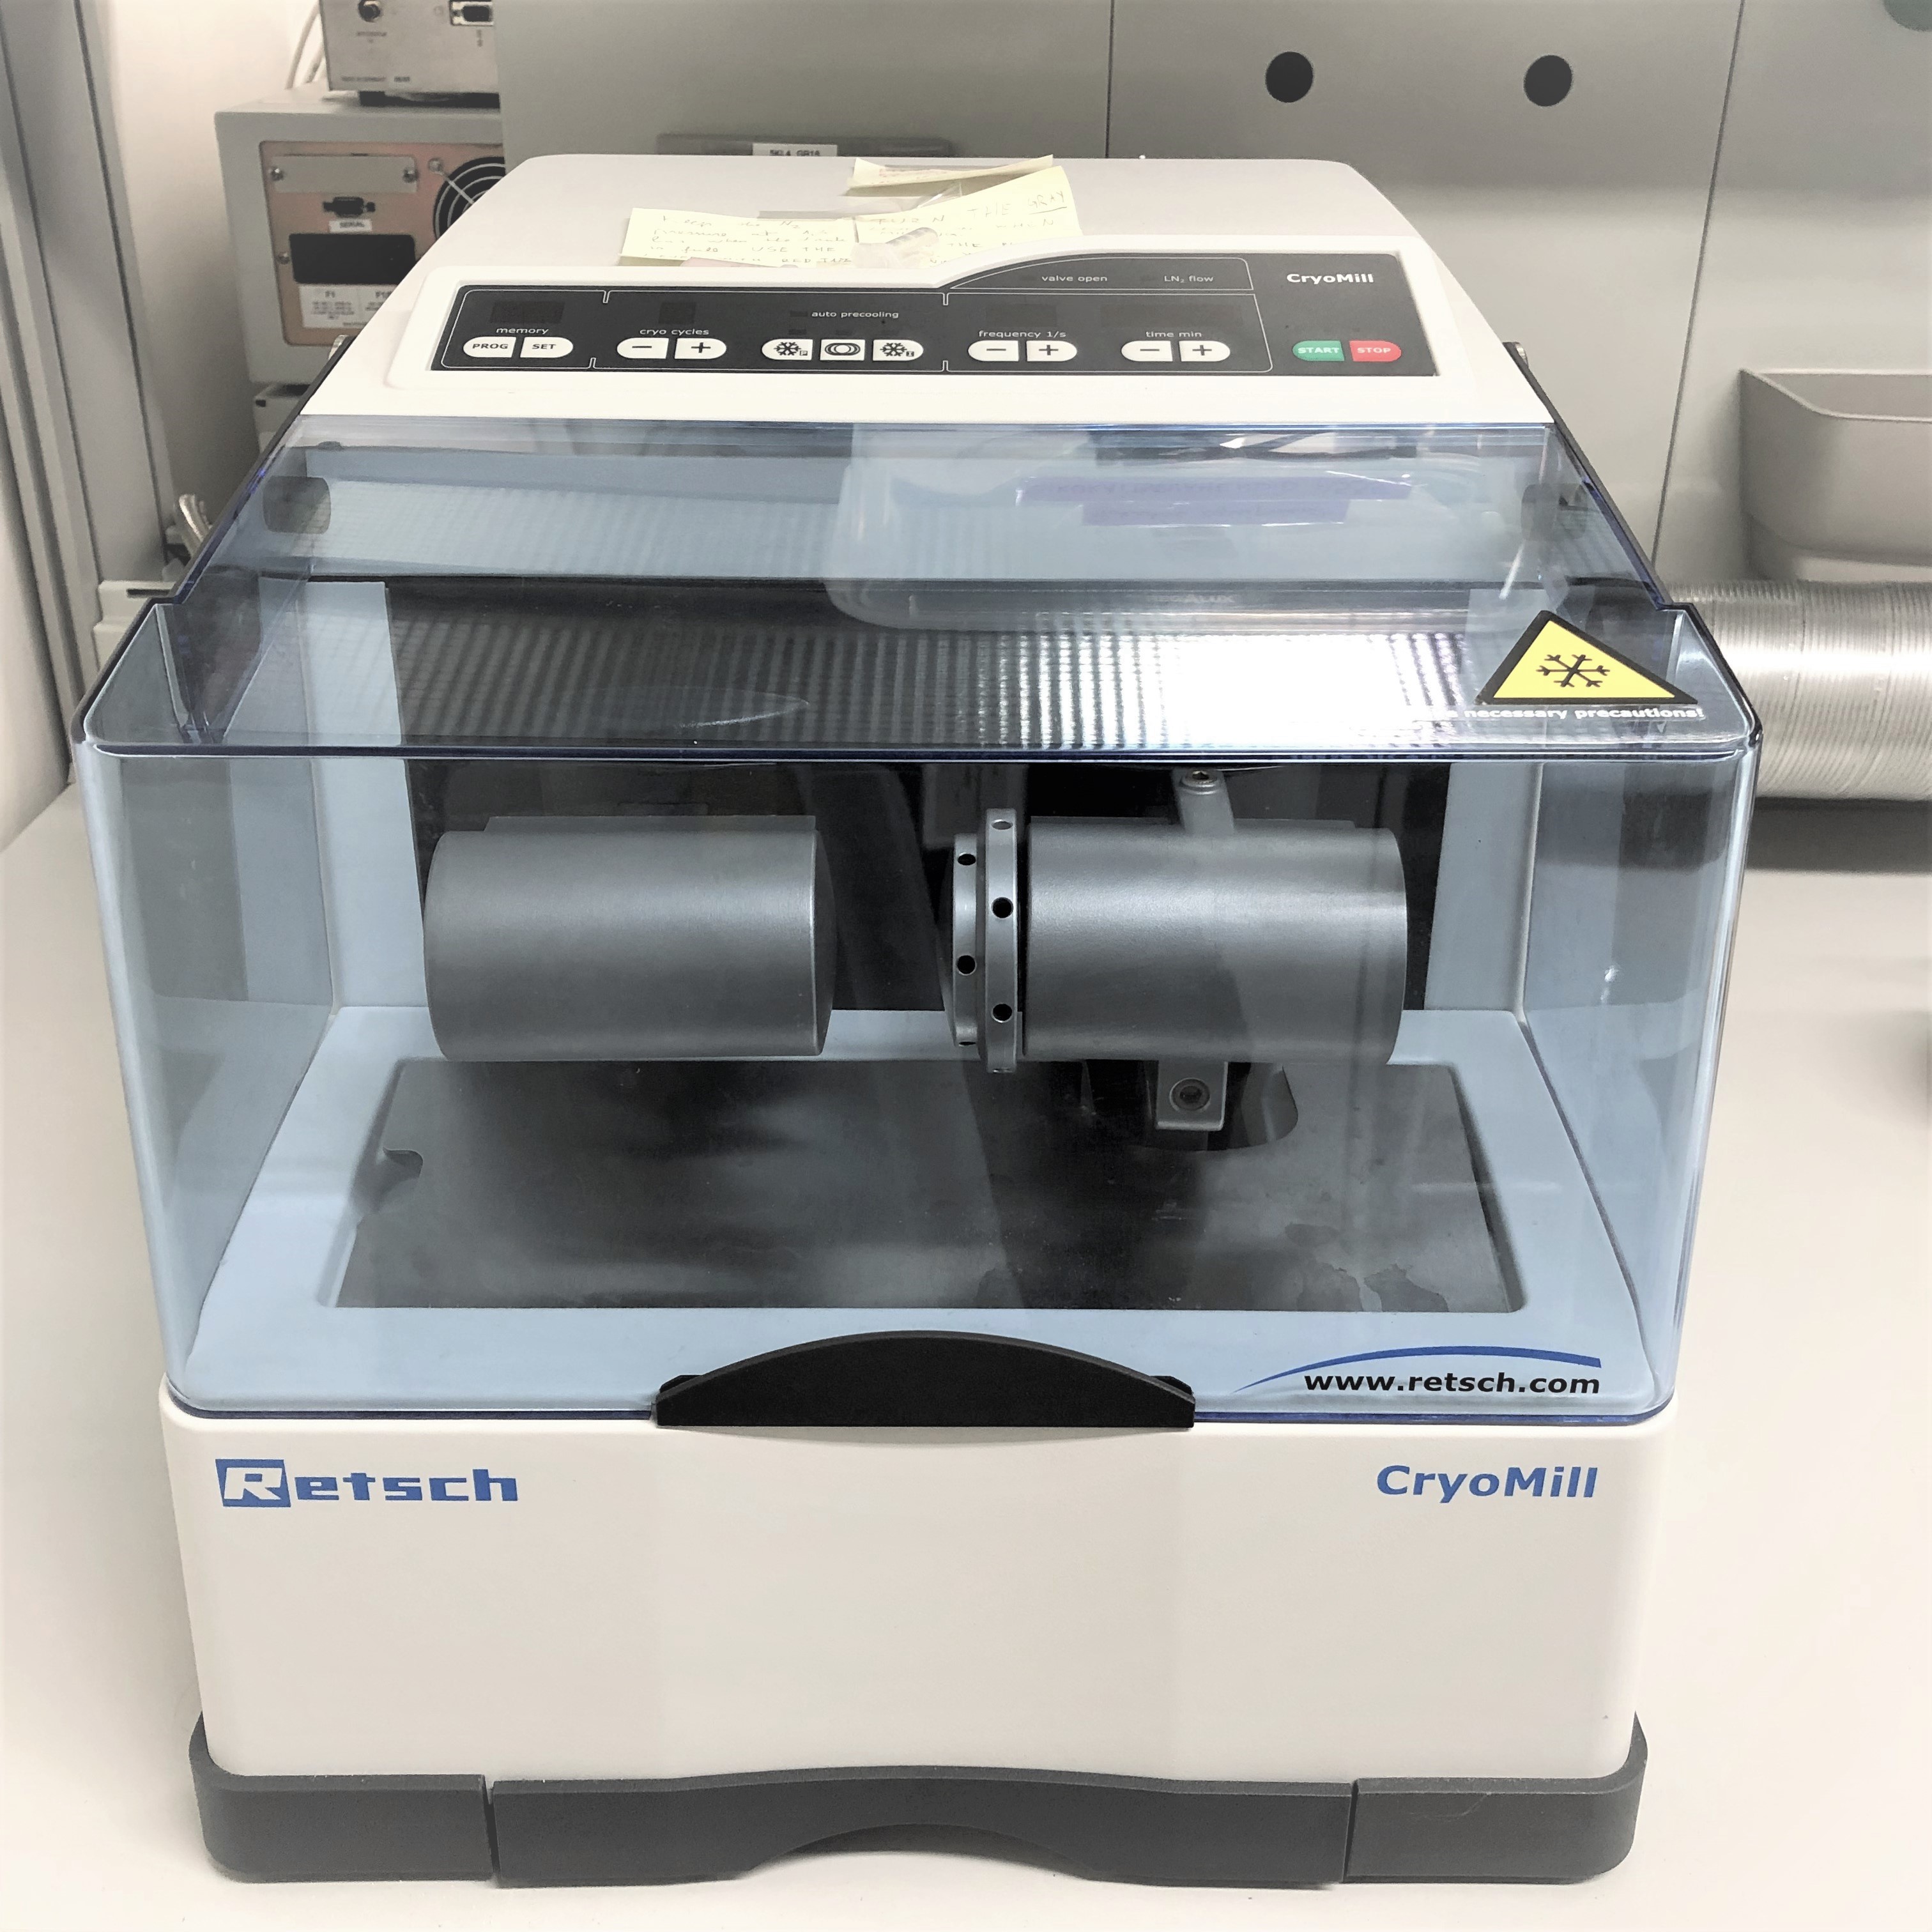 Retsch CryoMill for cryogenic grinding